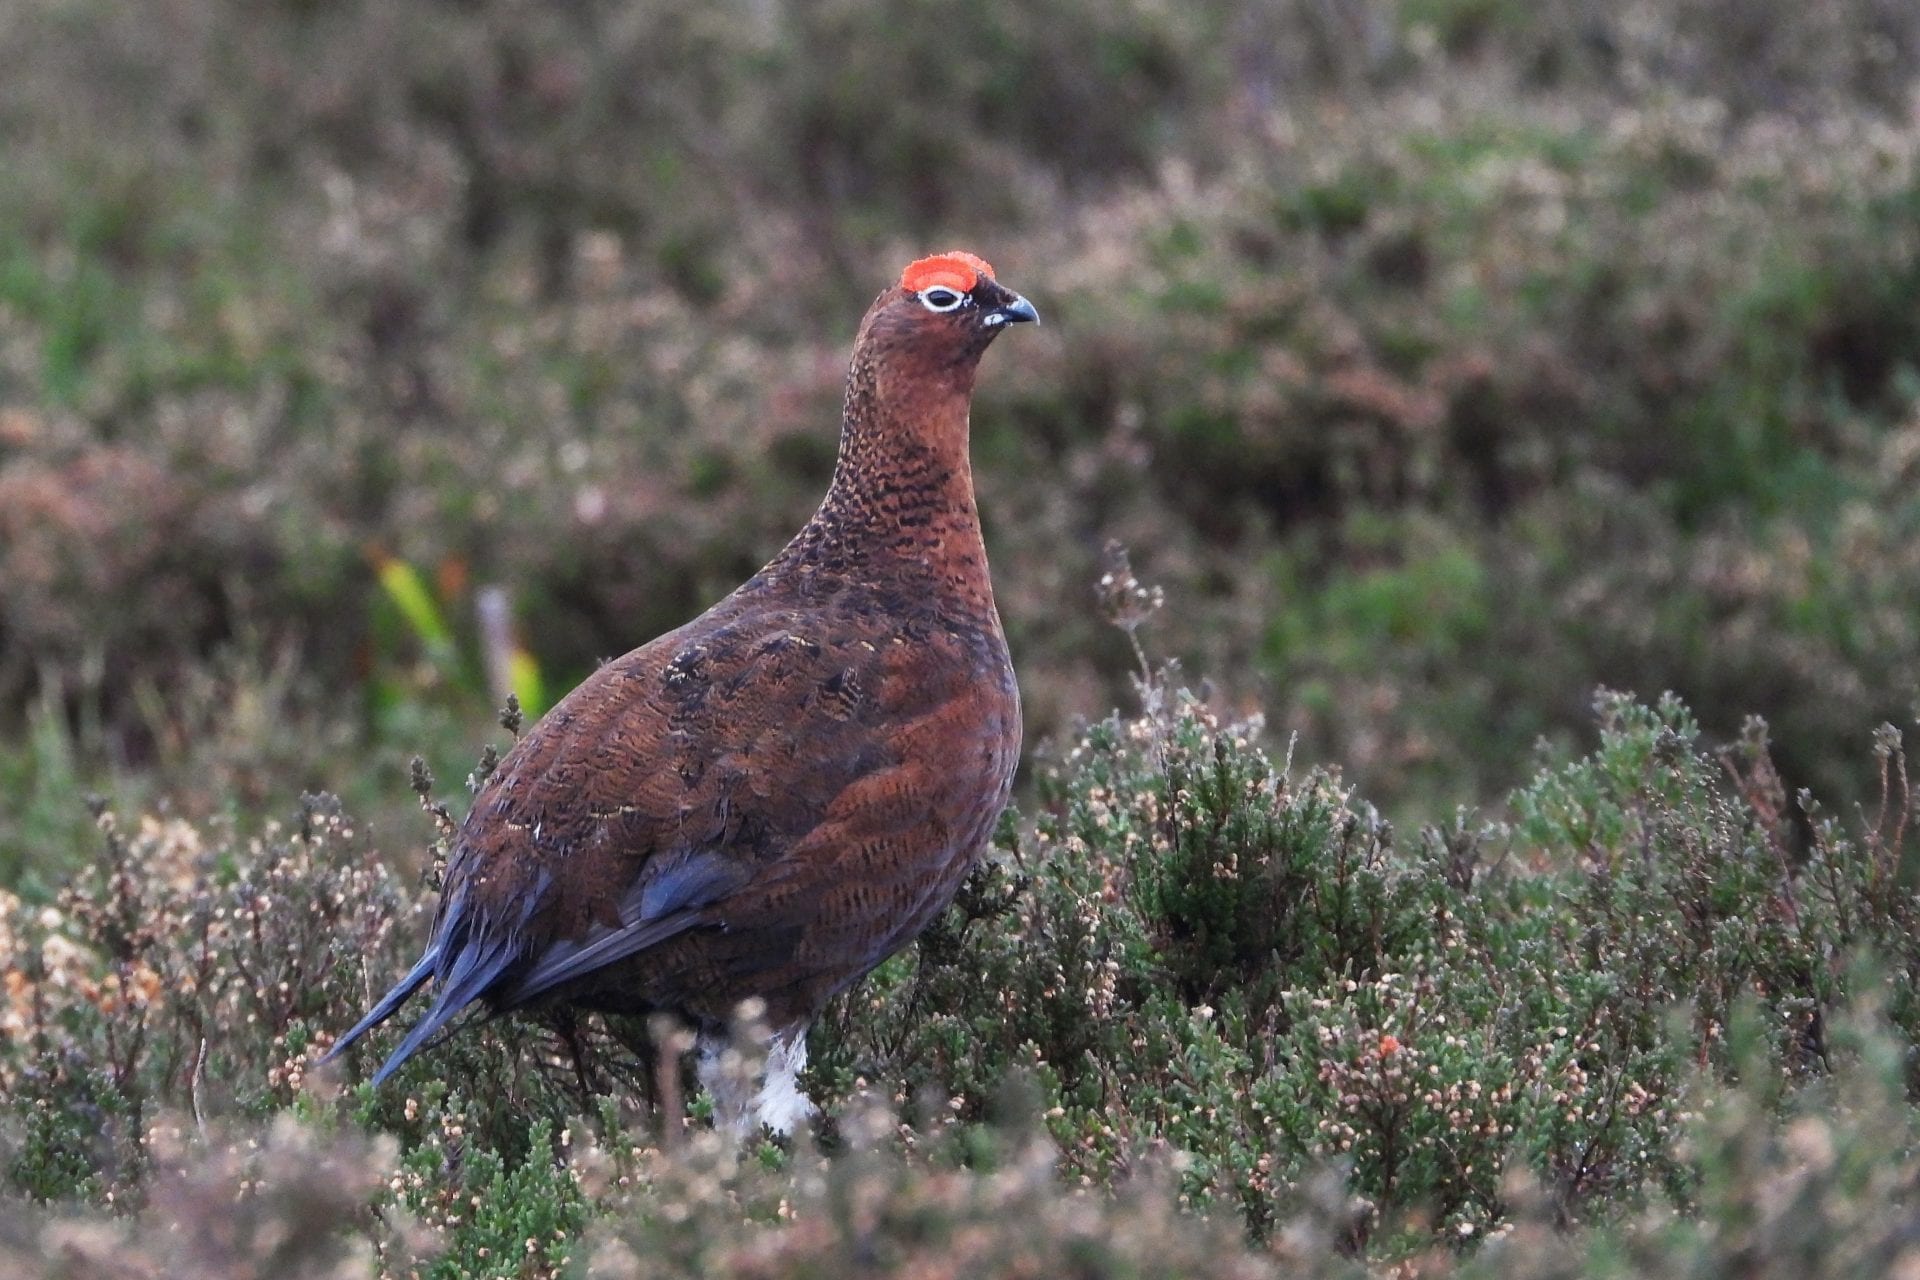 red-grouse-male-standing-in-heather